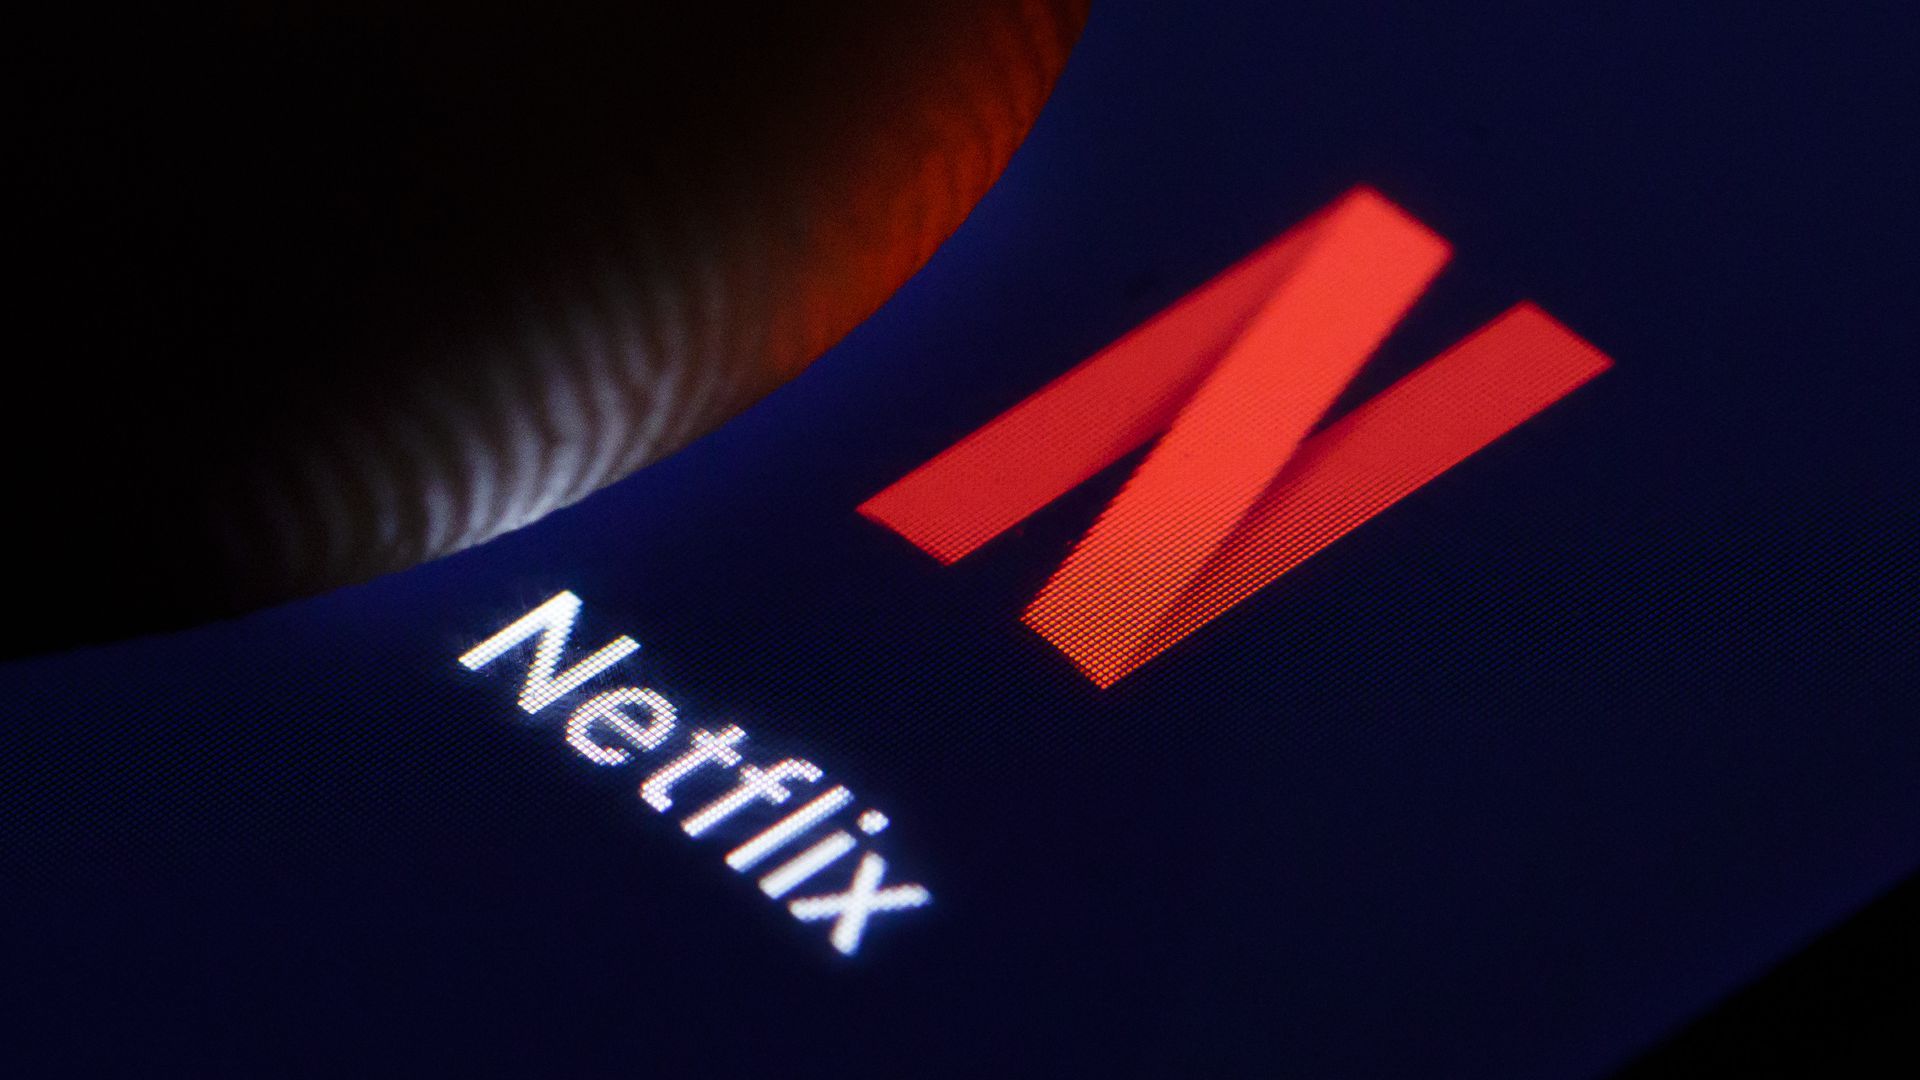 Netflix simply revealed detailed ‘subscriber data’ for the first time ever